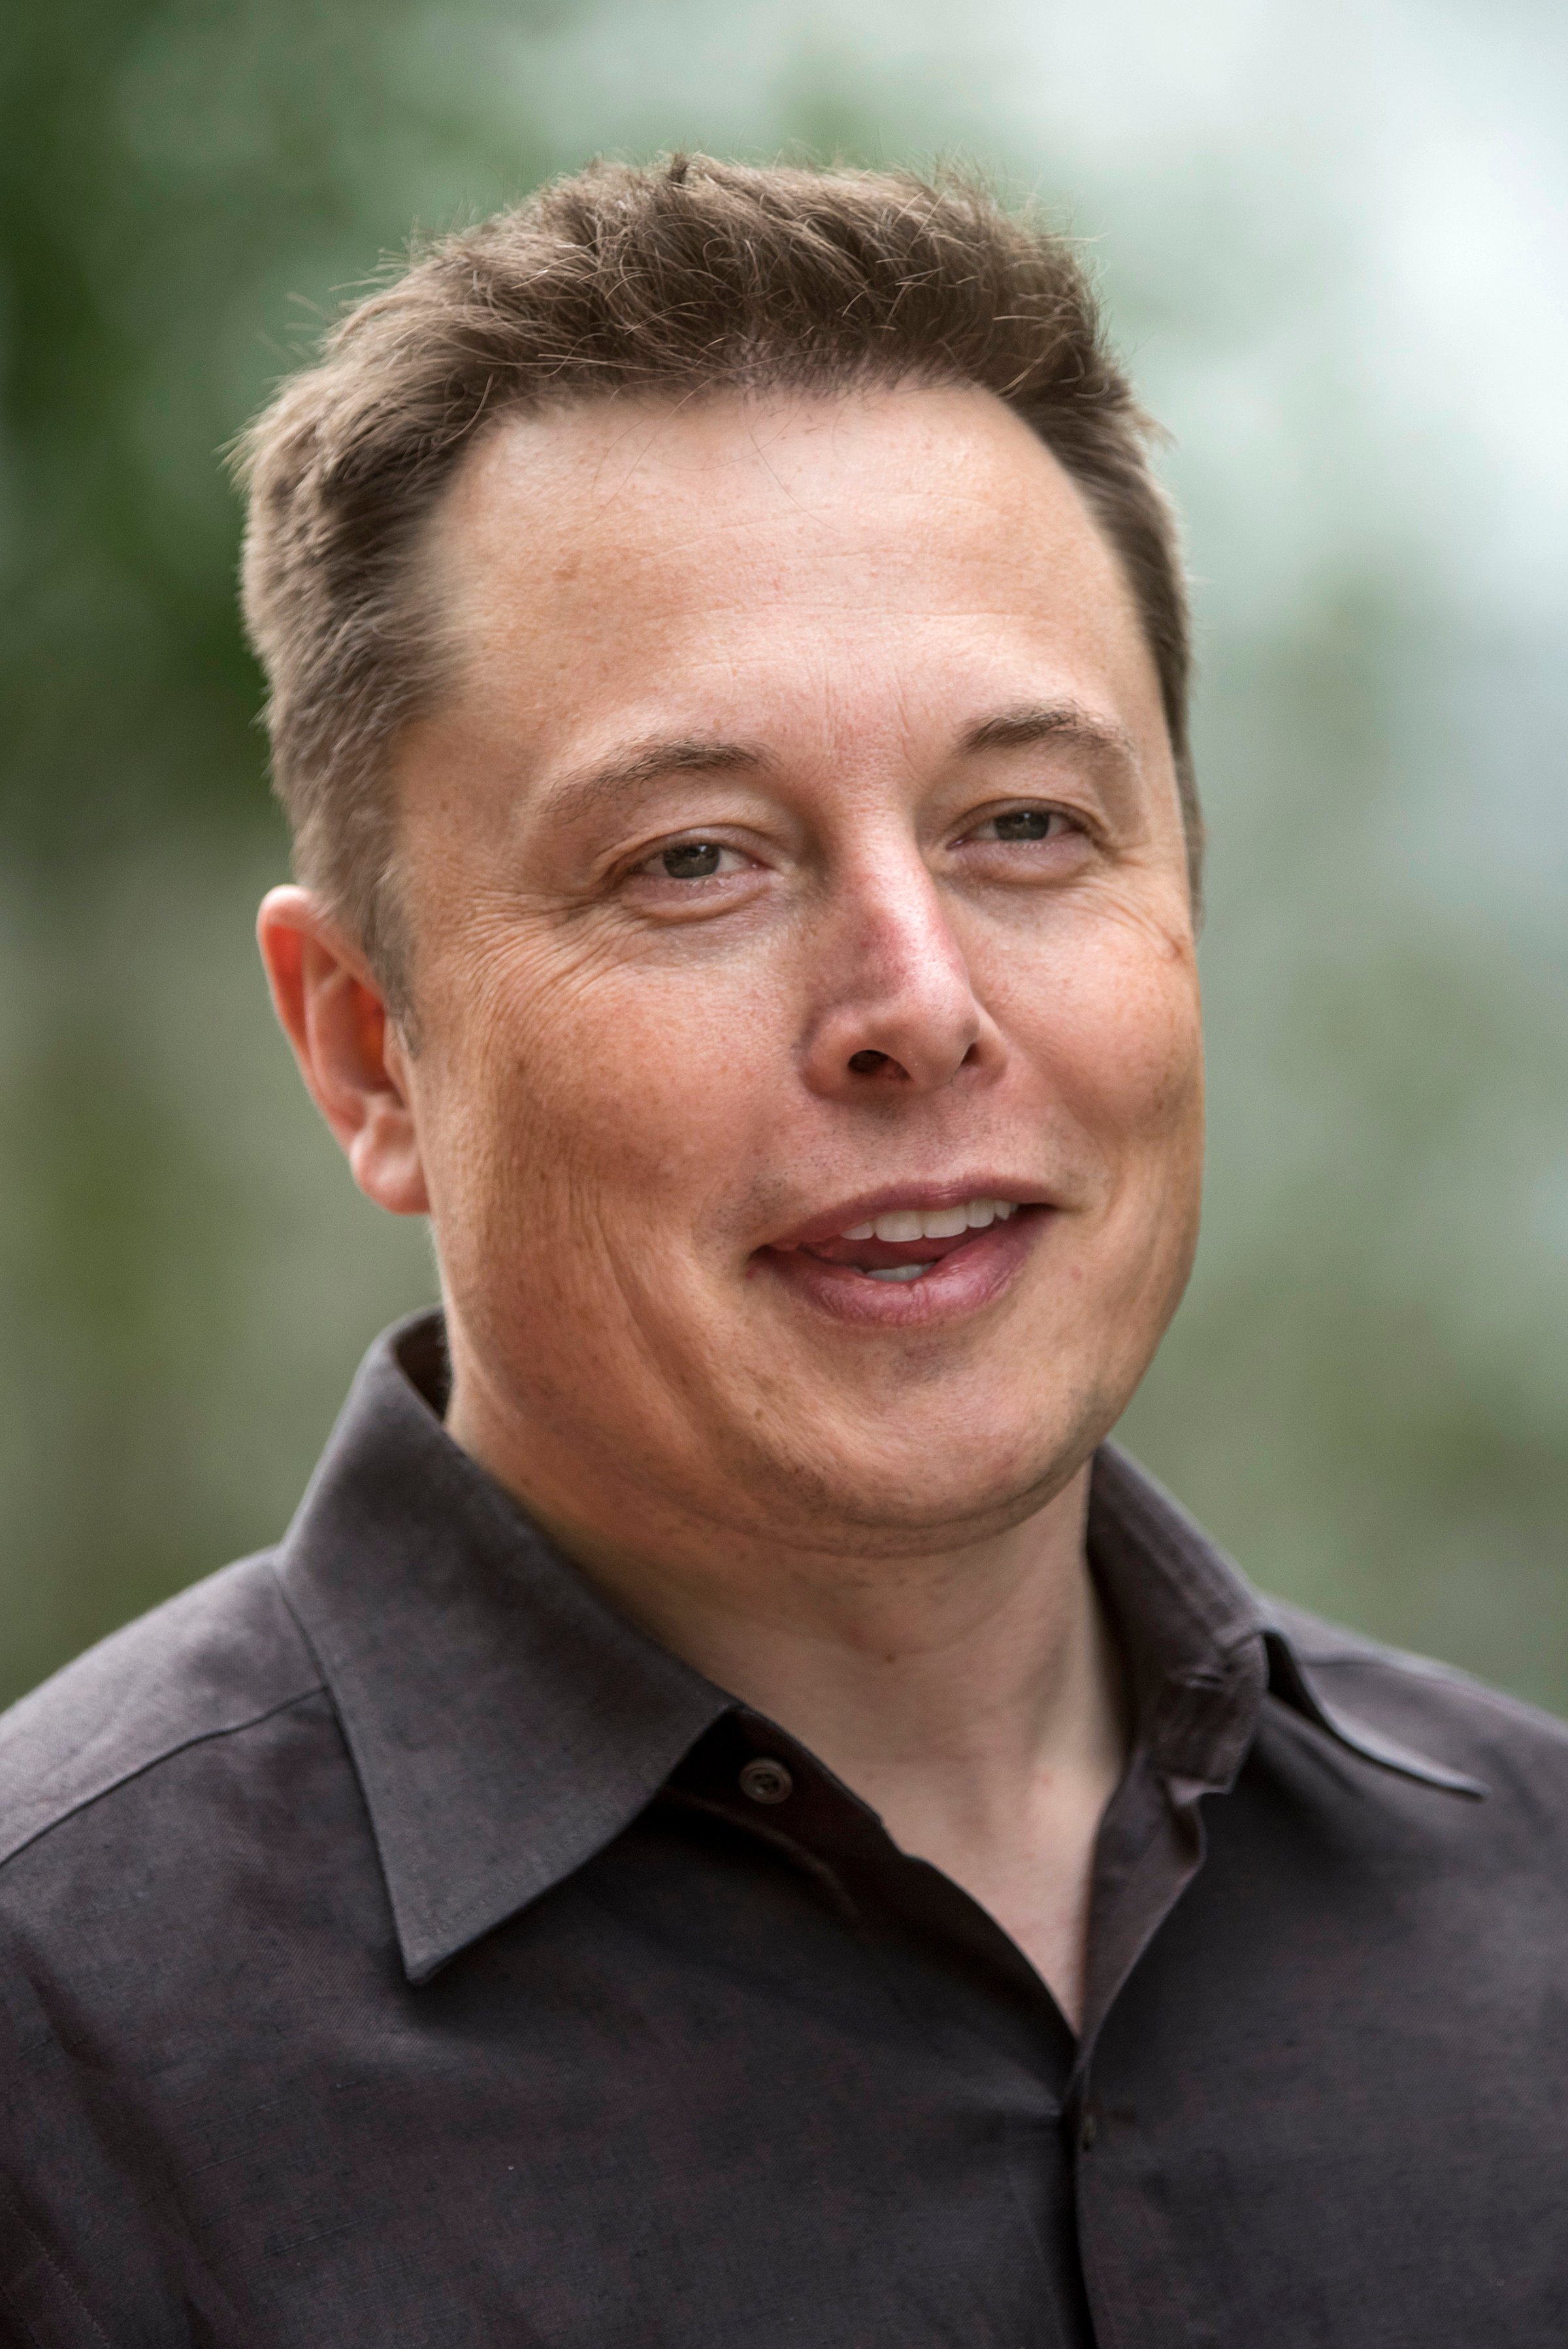 Elon Musk at the Allen & Co. Media and Technology Conference in Sun Valley, Idaho on July 8, 2015.